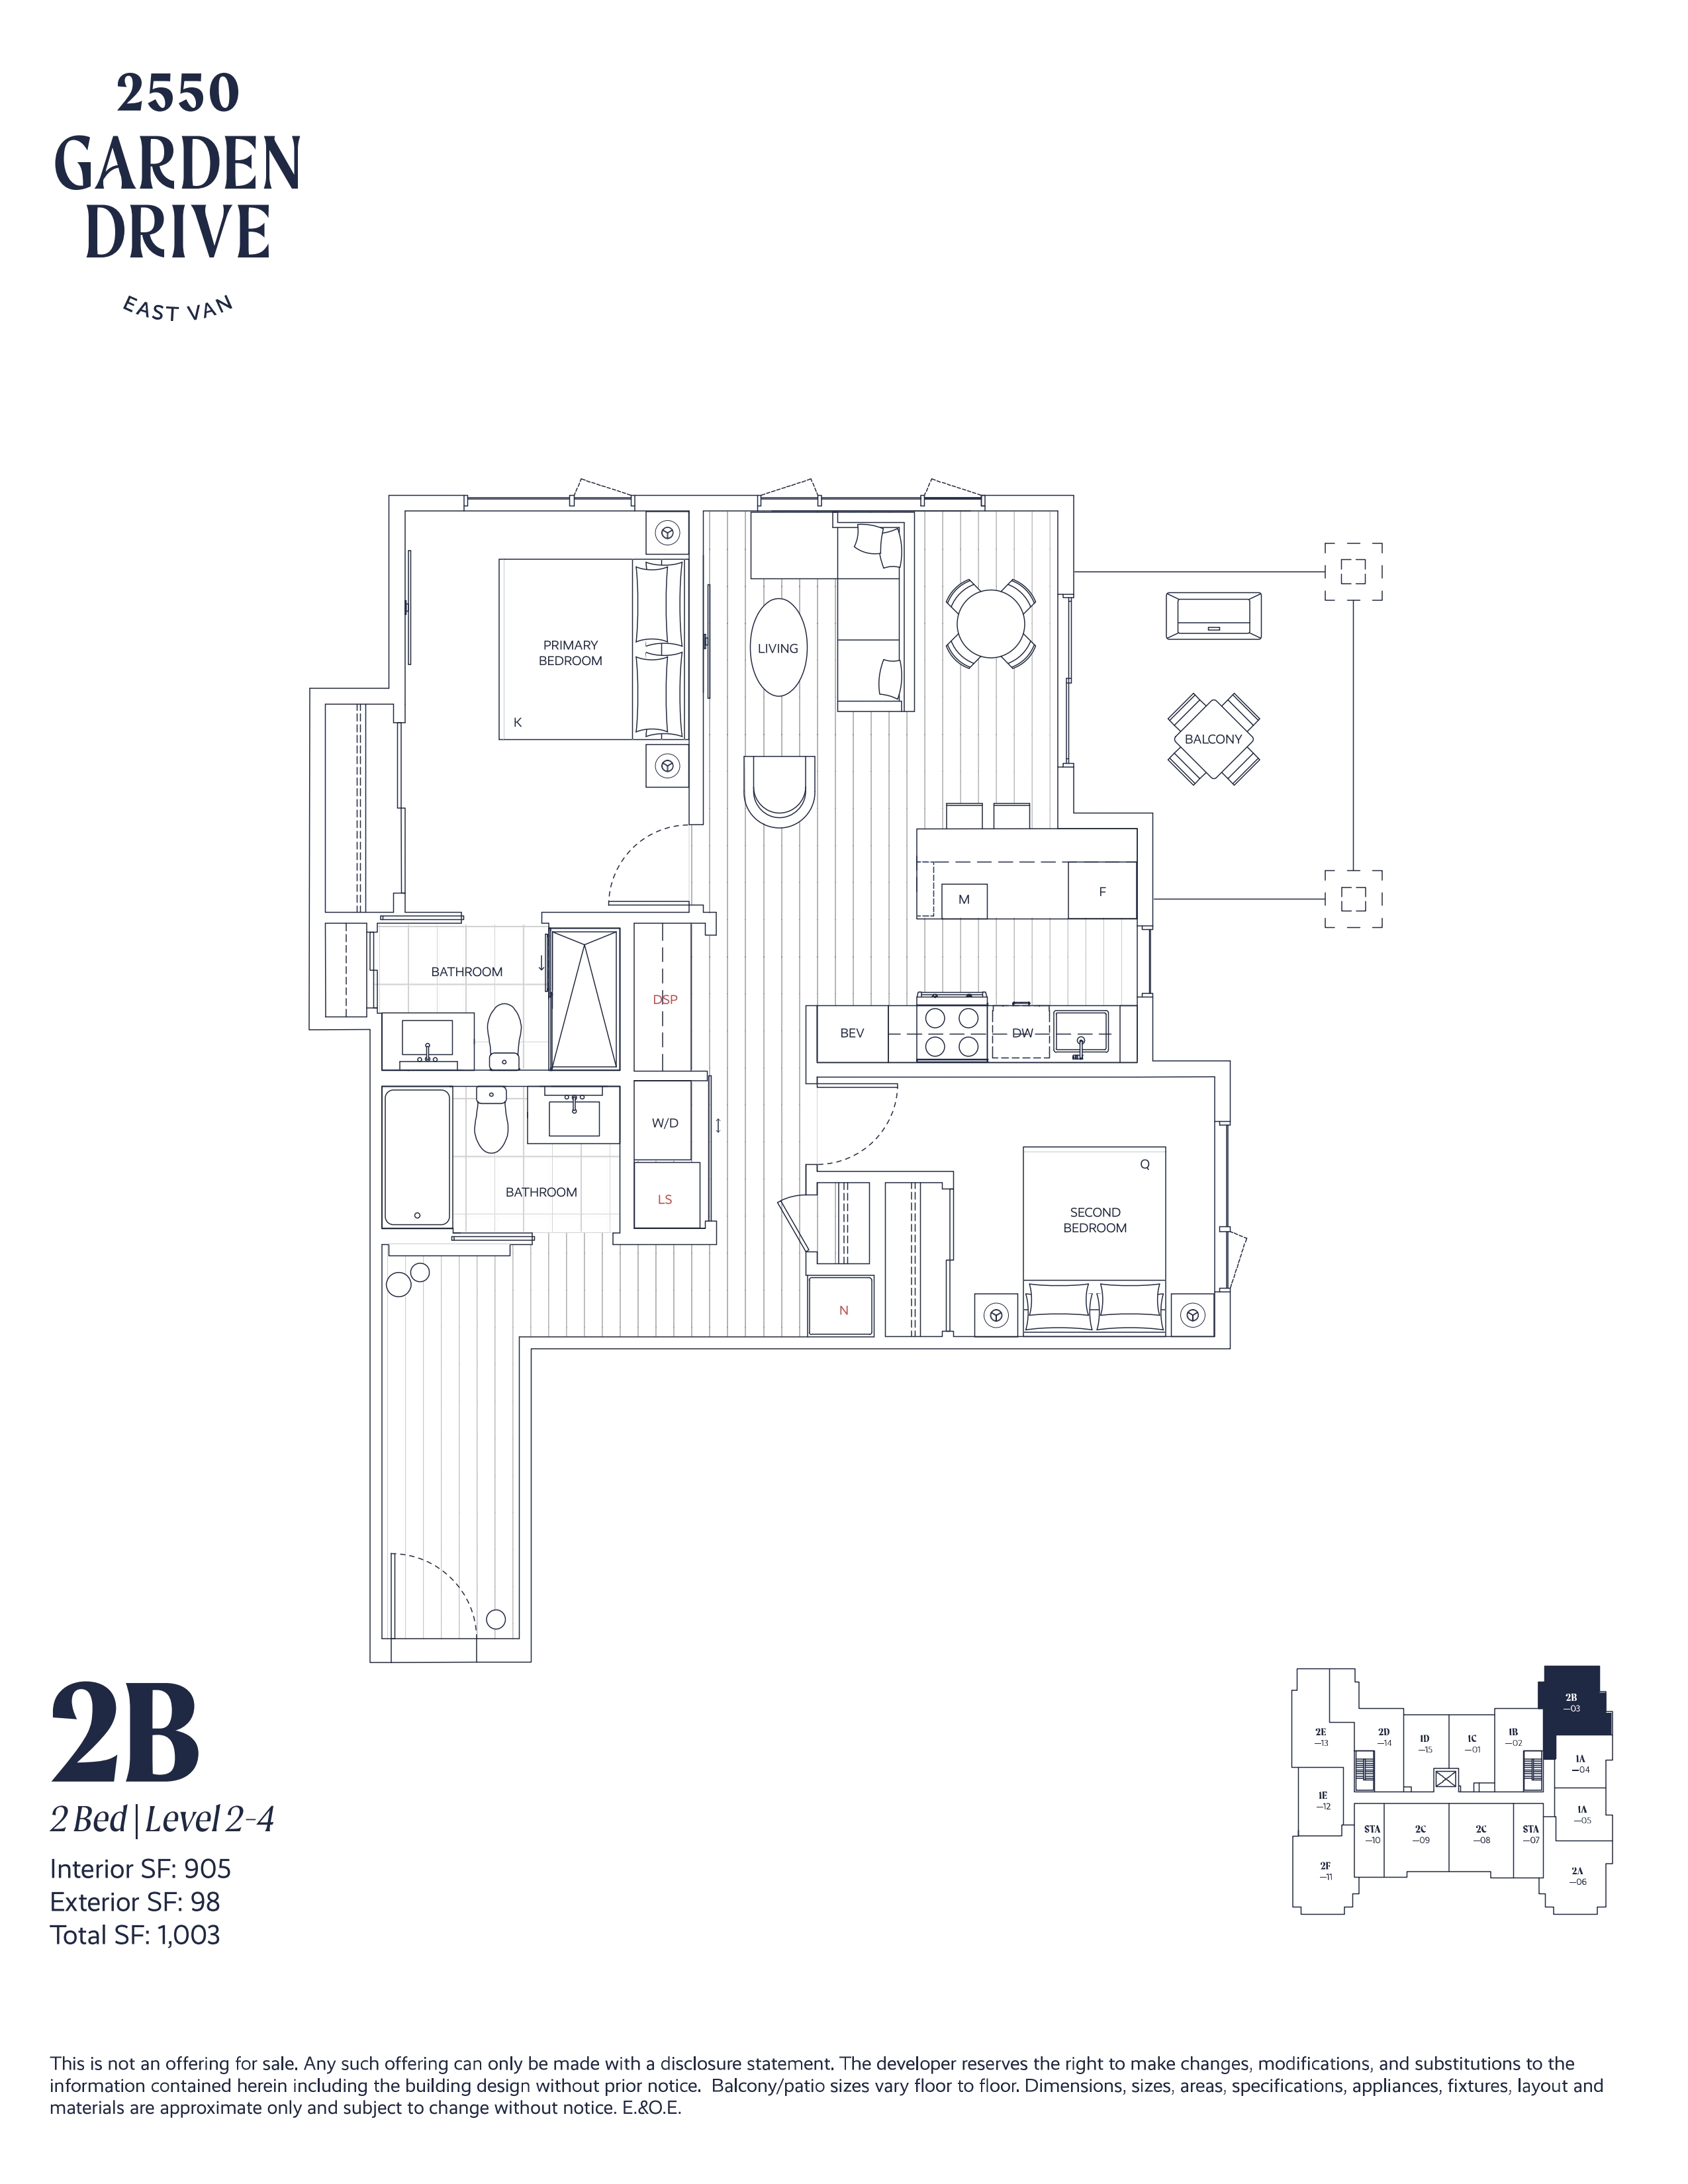 2B Floor Plan of 2550 Garden Drive Condos with undefined beds